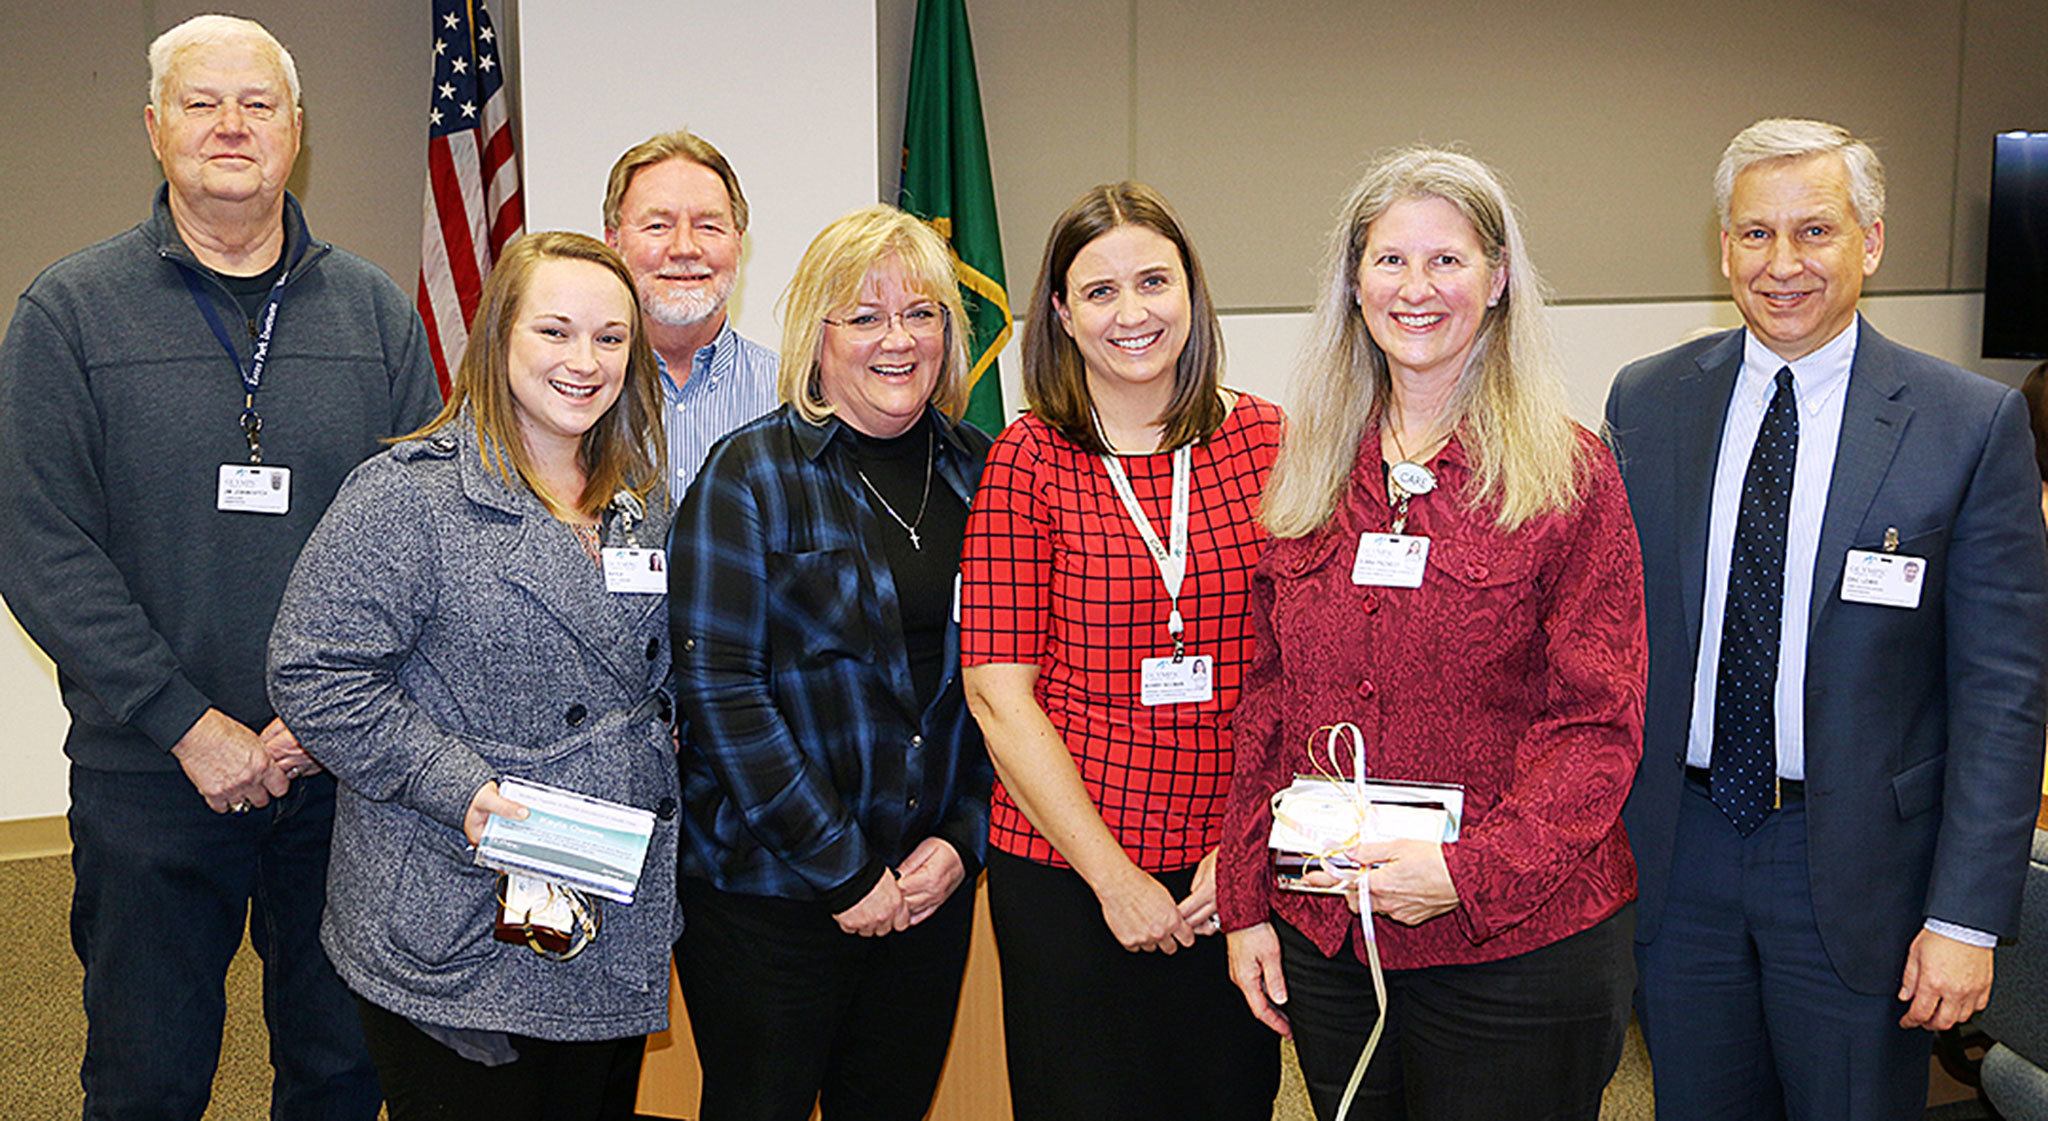 Milestone: OMC honors employees for fundraising efforts